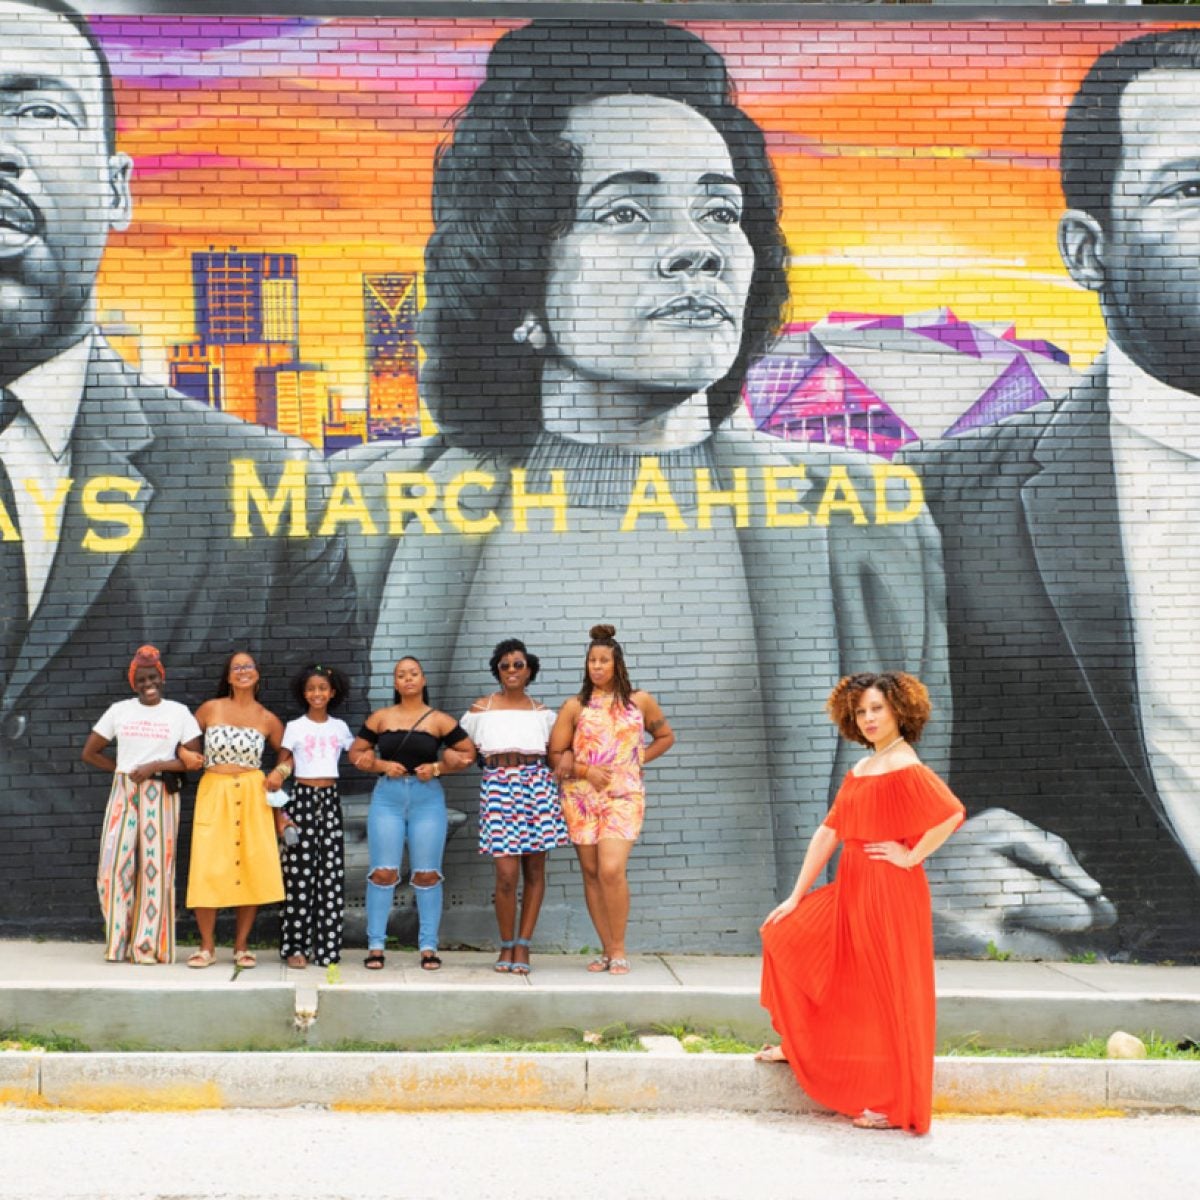 The Black Girl Magic Tours In Atlanta Are A Celebration Of Black Art And Womanhood